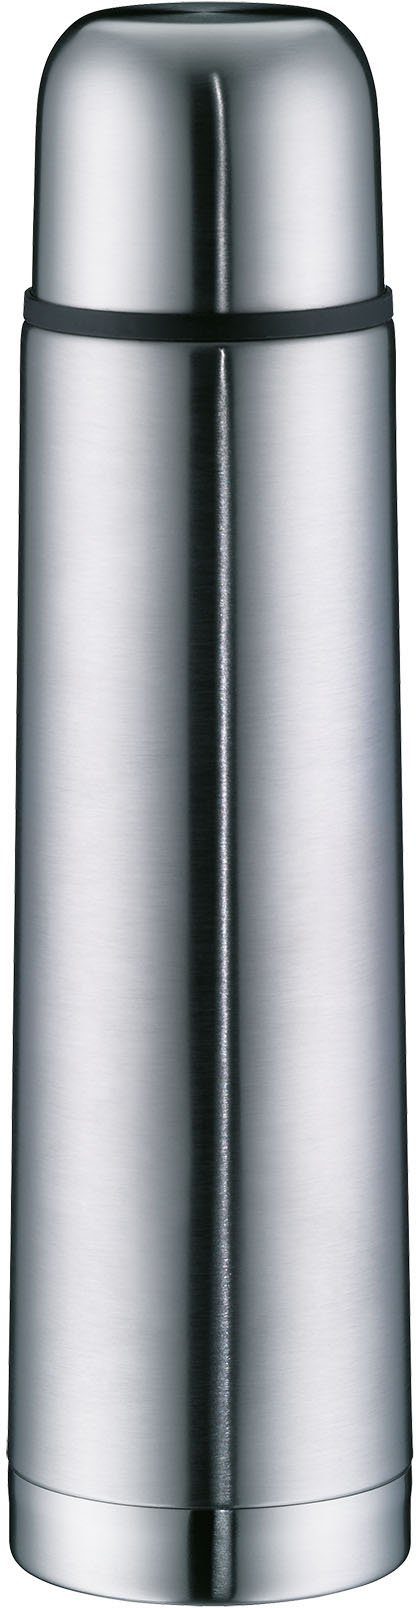 Alfi Thermoflasche isoTherm Eco, Edelstahl